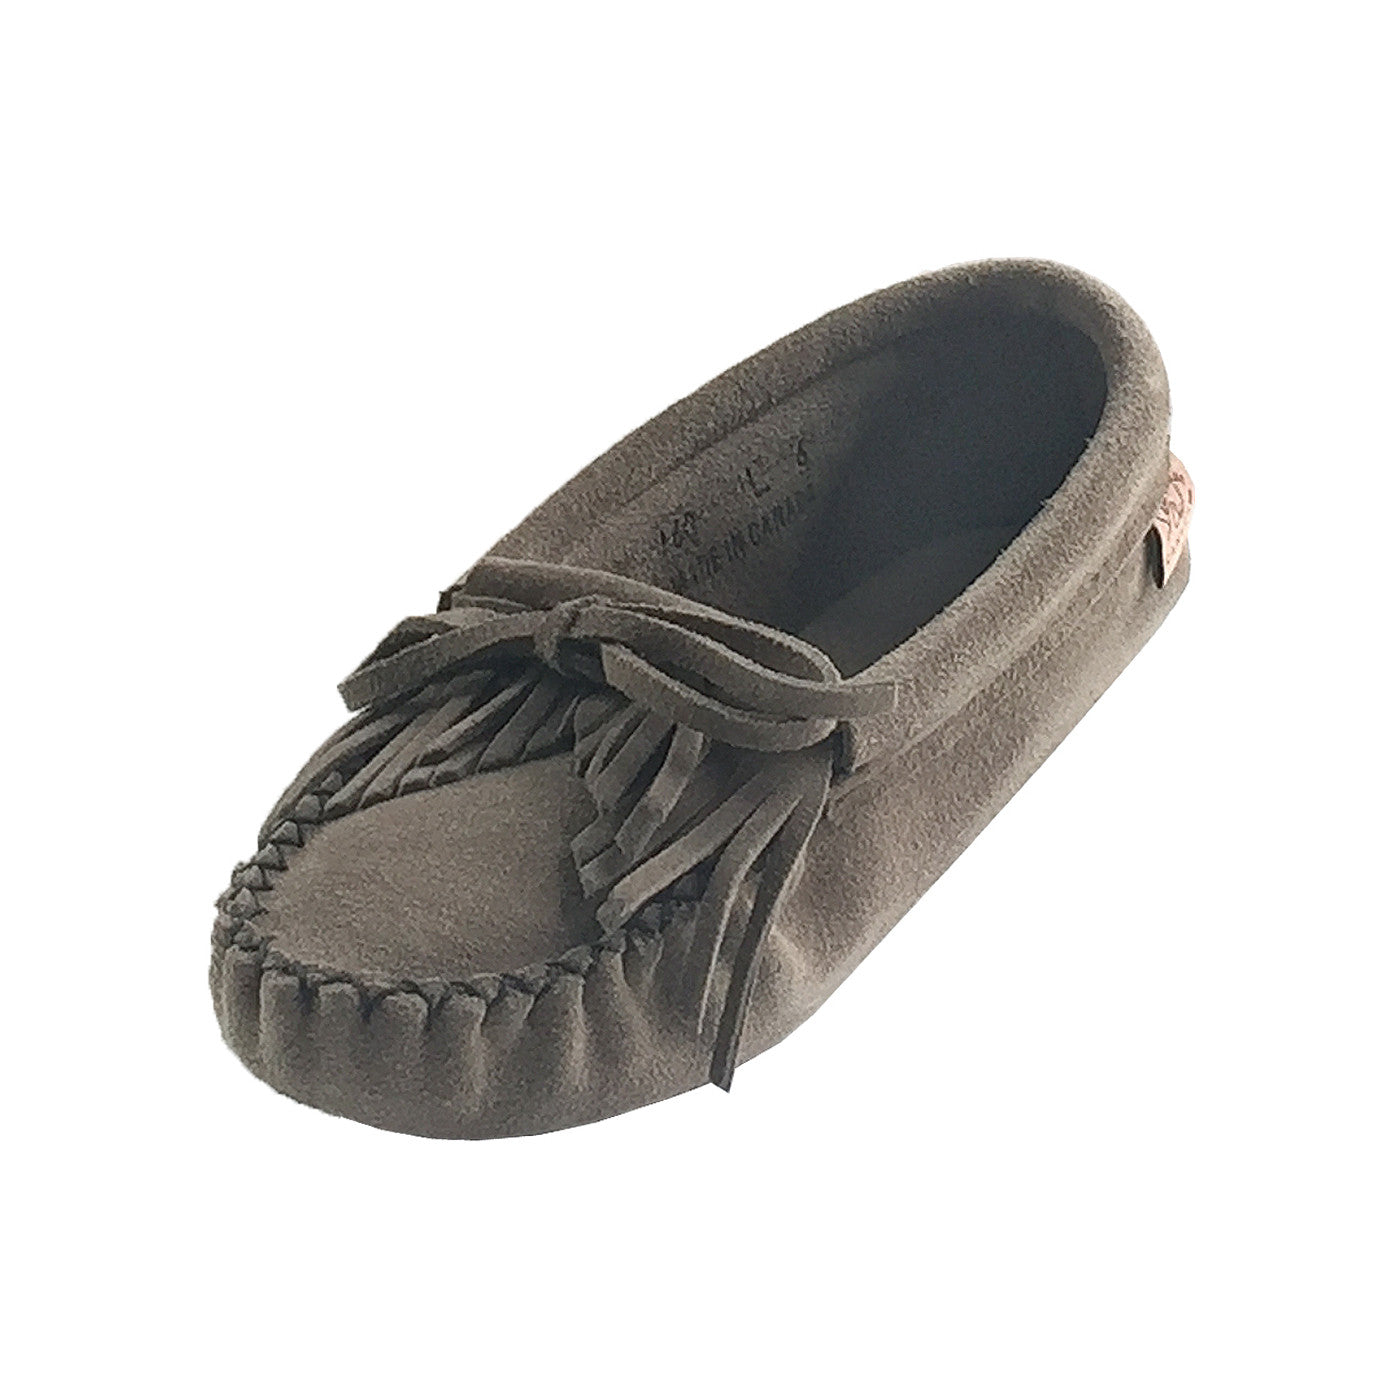 soft sole slippers for ladies